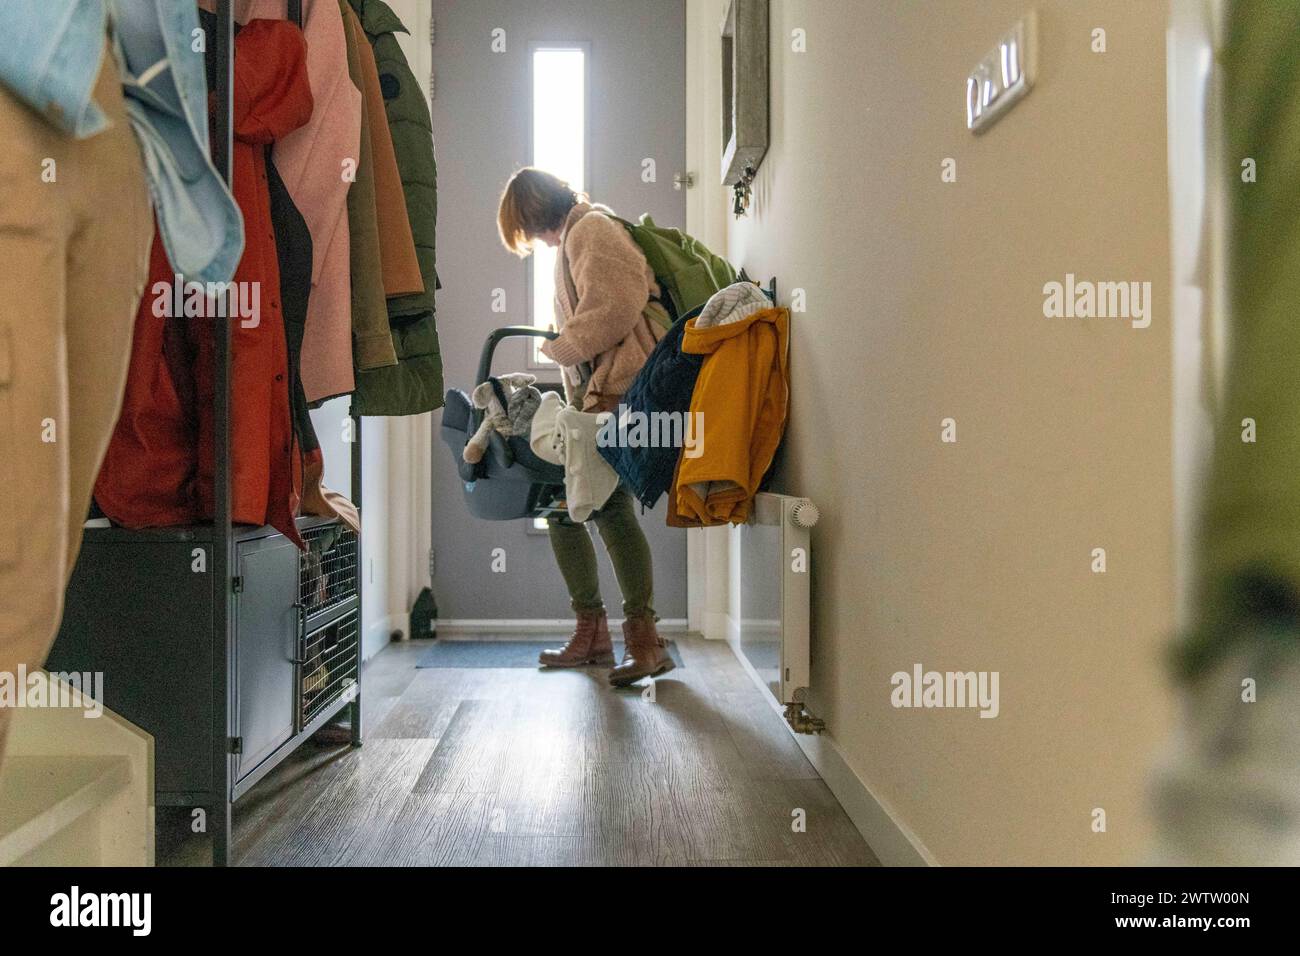 A person is sorting out laundry in a bright, cozy hallway filled with coats hanging on hooks. Stock Photo